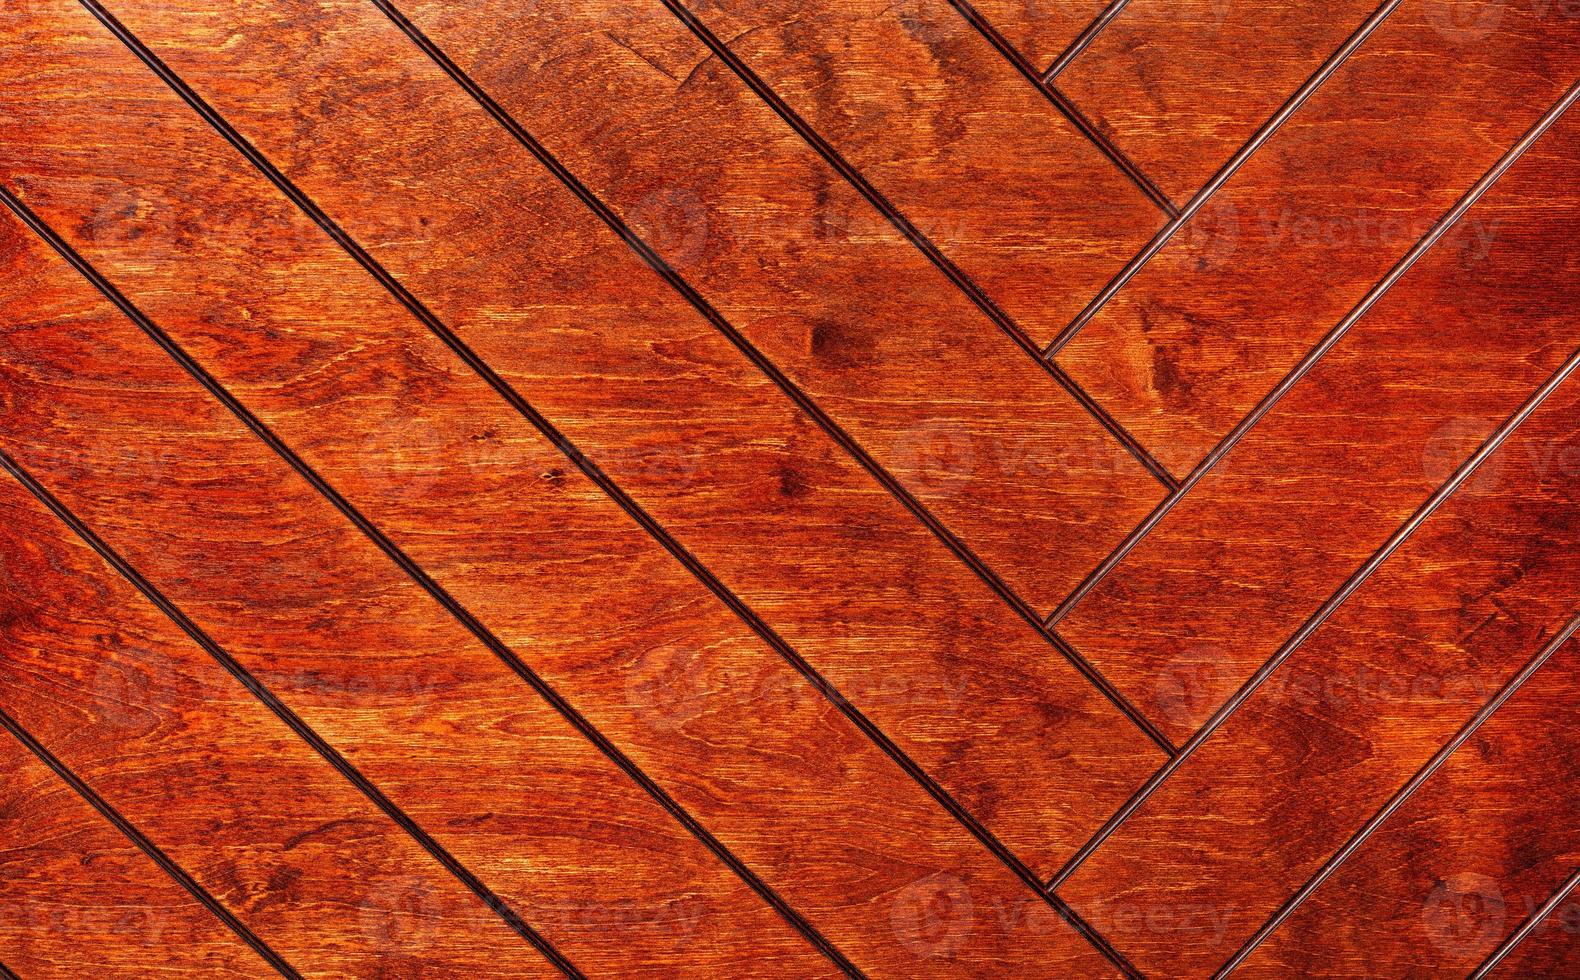 Rectangular boards are painted in orange and neatly laid out with a herringbone pattern. photo